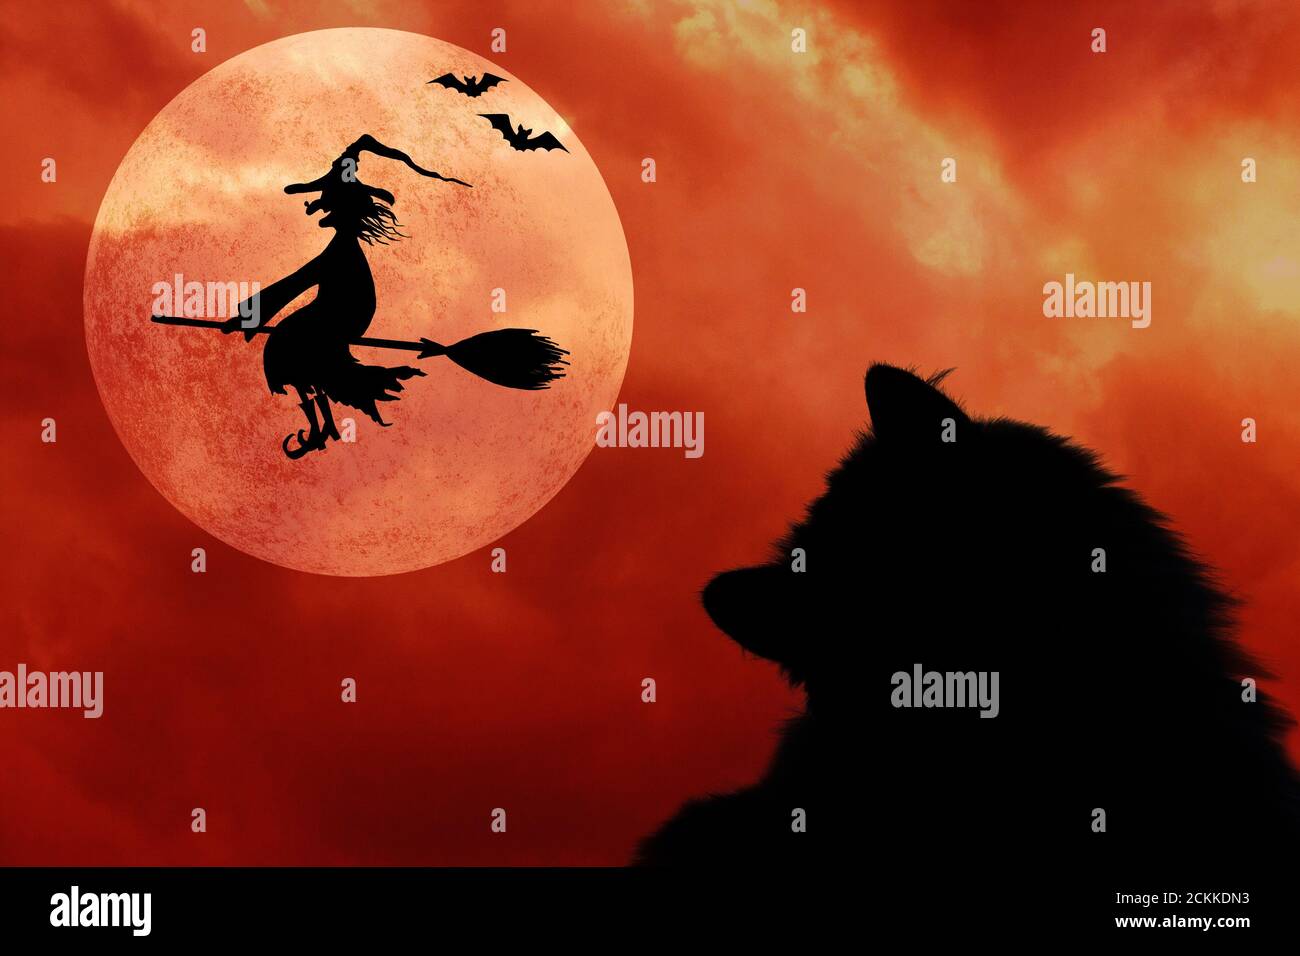 Halloween horizontal background with silhouettes of black cat, bats, full moon and smiling wicked witch flying on broomstick with hat with a wart on t Stock Photo